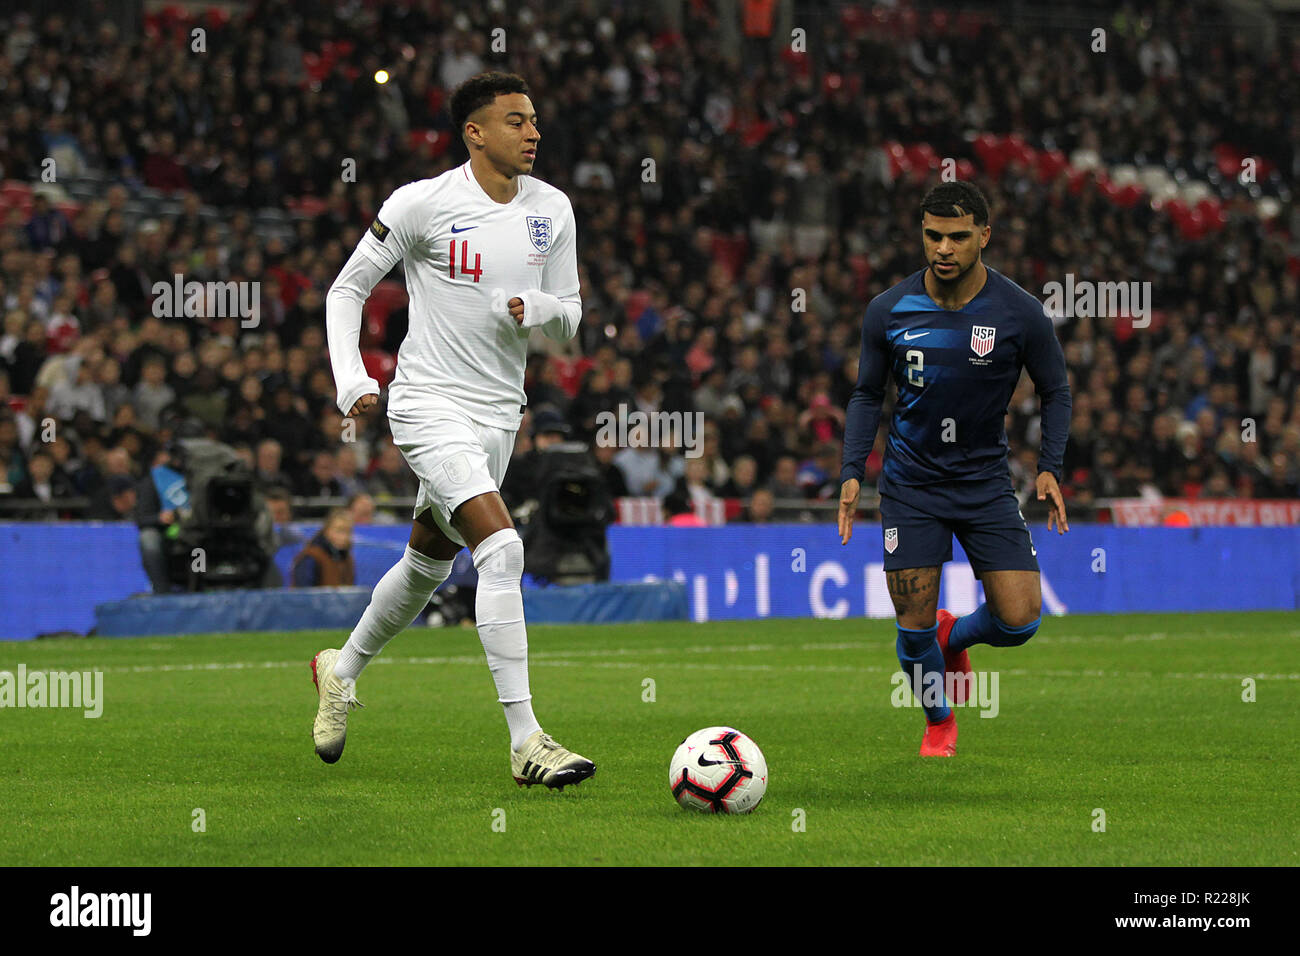 London, UK. 15th November, 2018. Jesse Lingard of England under pressure from DeAndre Yedlin of USA during the International Friendly match between England and USA at Wembley Stadium on November 15th 2018 in London, England. (Photo by Matt Bradshaw/phcimages) Credit: PHC Images/Alamy Live News Stock Photo